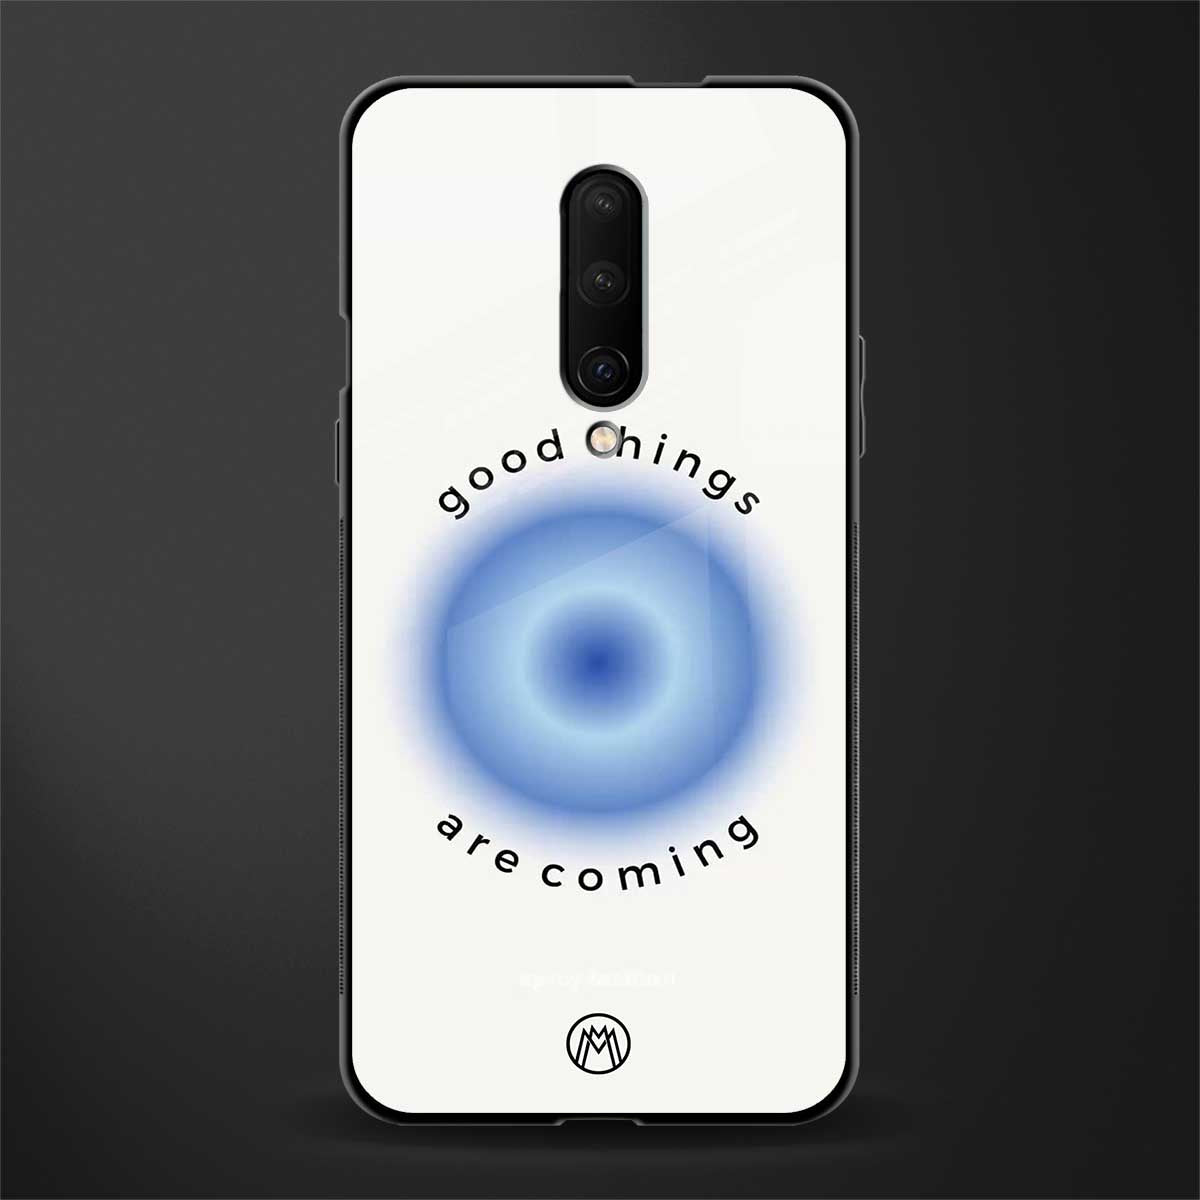 good things are coming glass case for oneplus 7 pro image